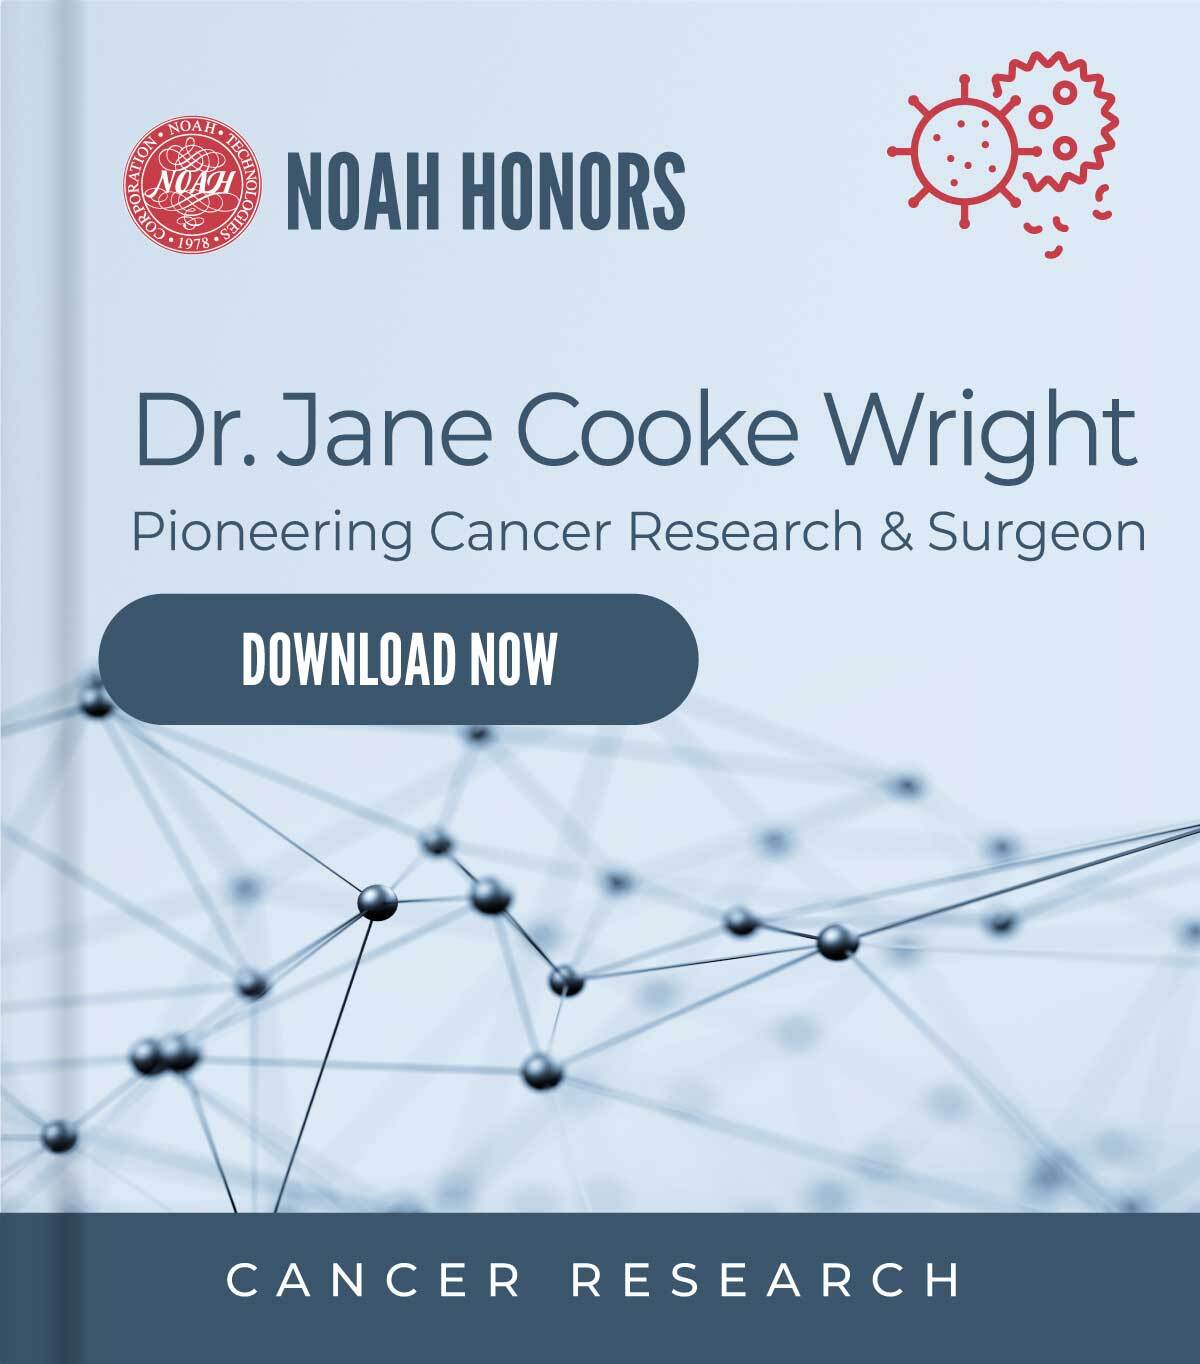 Noah honors Dr. Jane Cooke Wright cover graphic to download white paper now